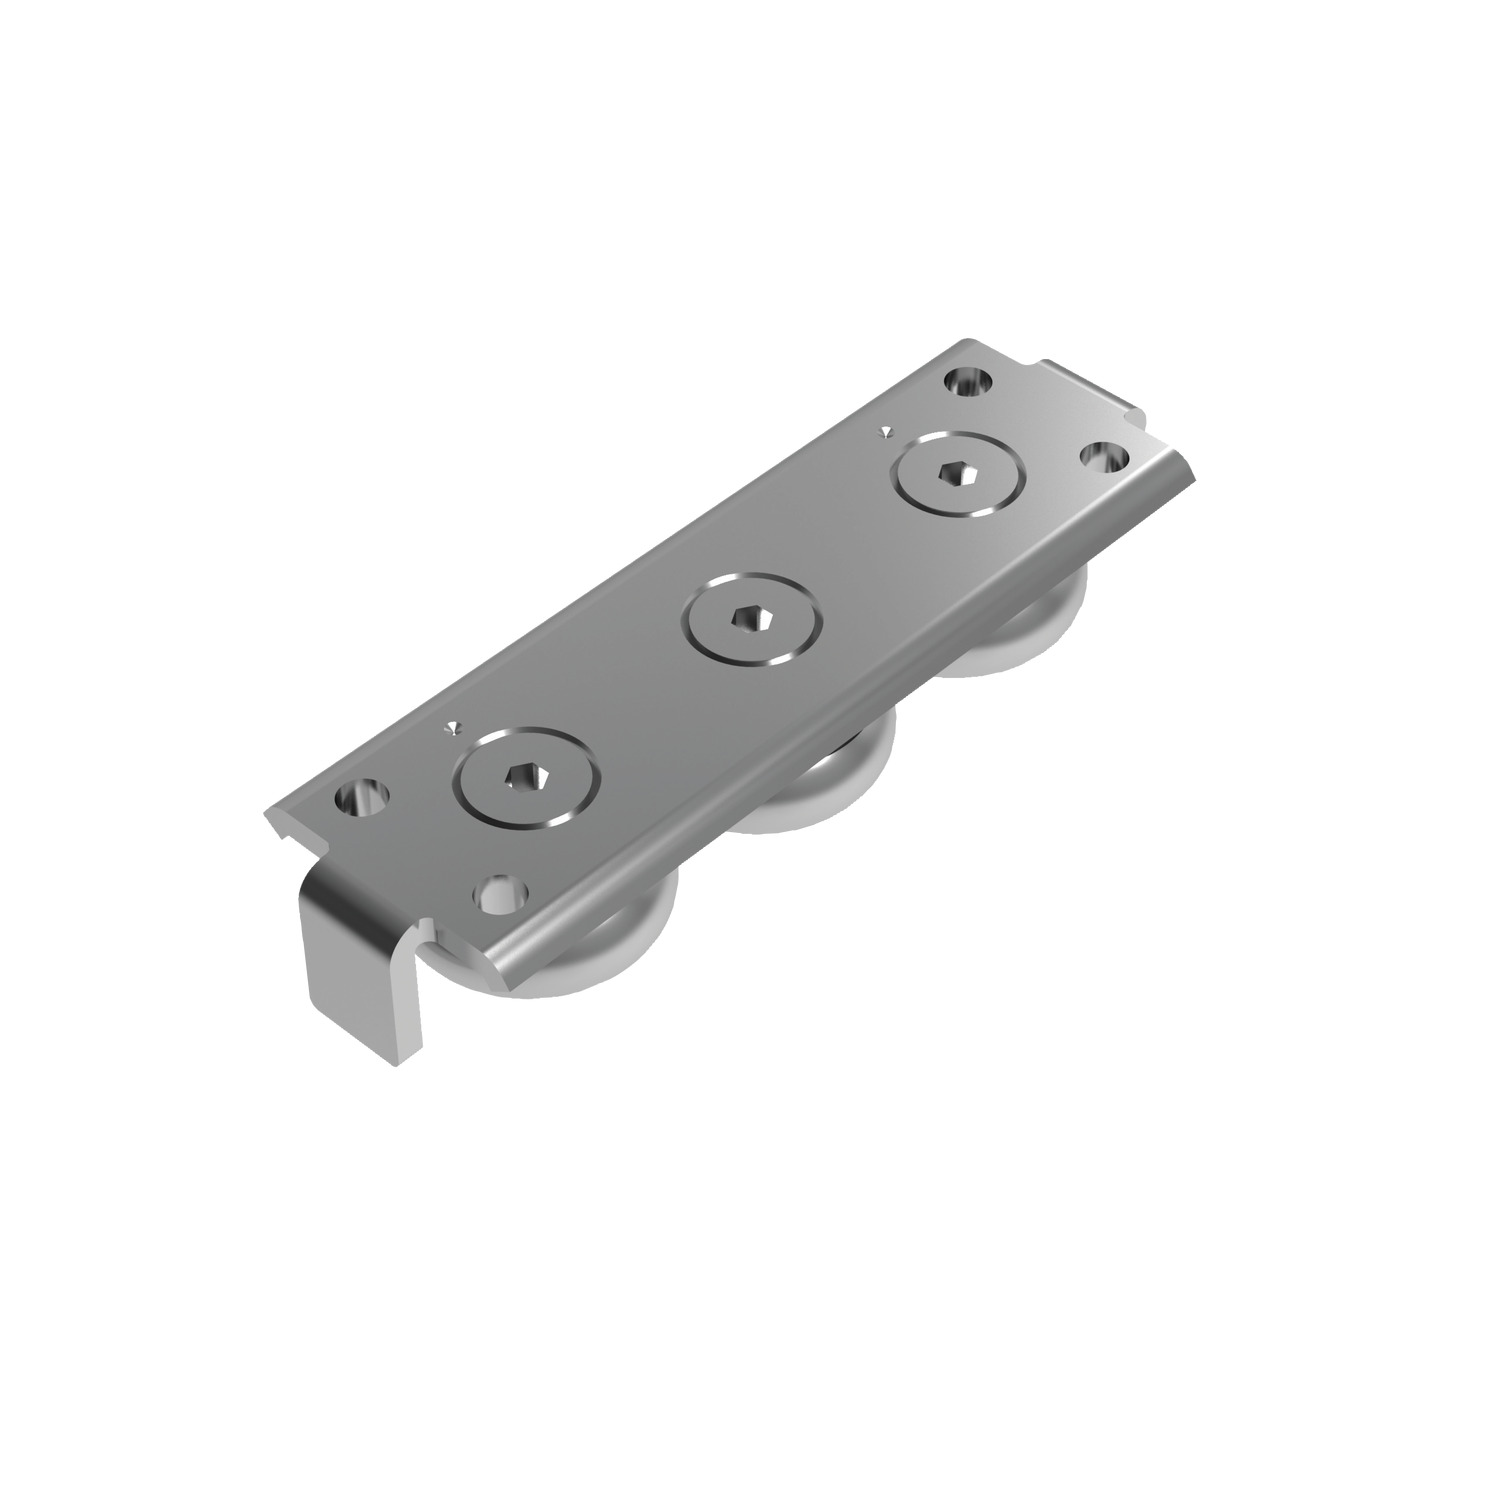 Product L1970.LP, Low Profile Steel Sliders for T rail (master) / 